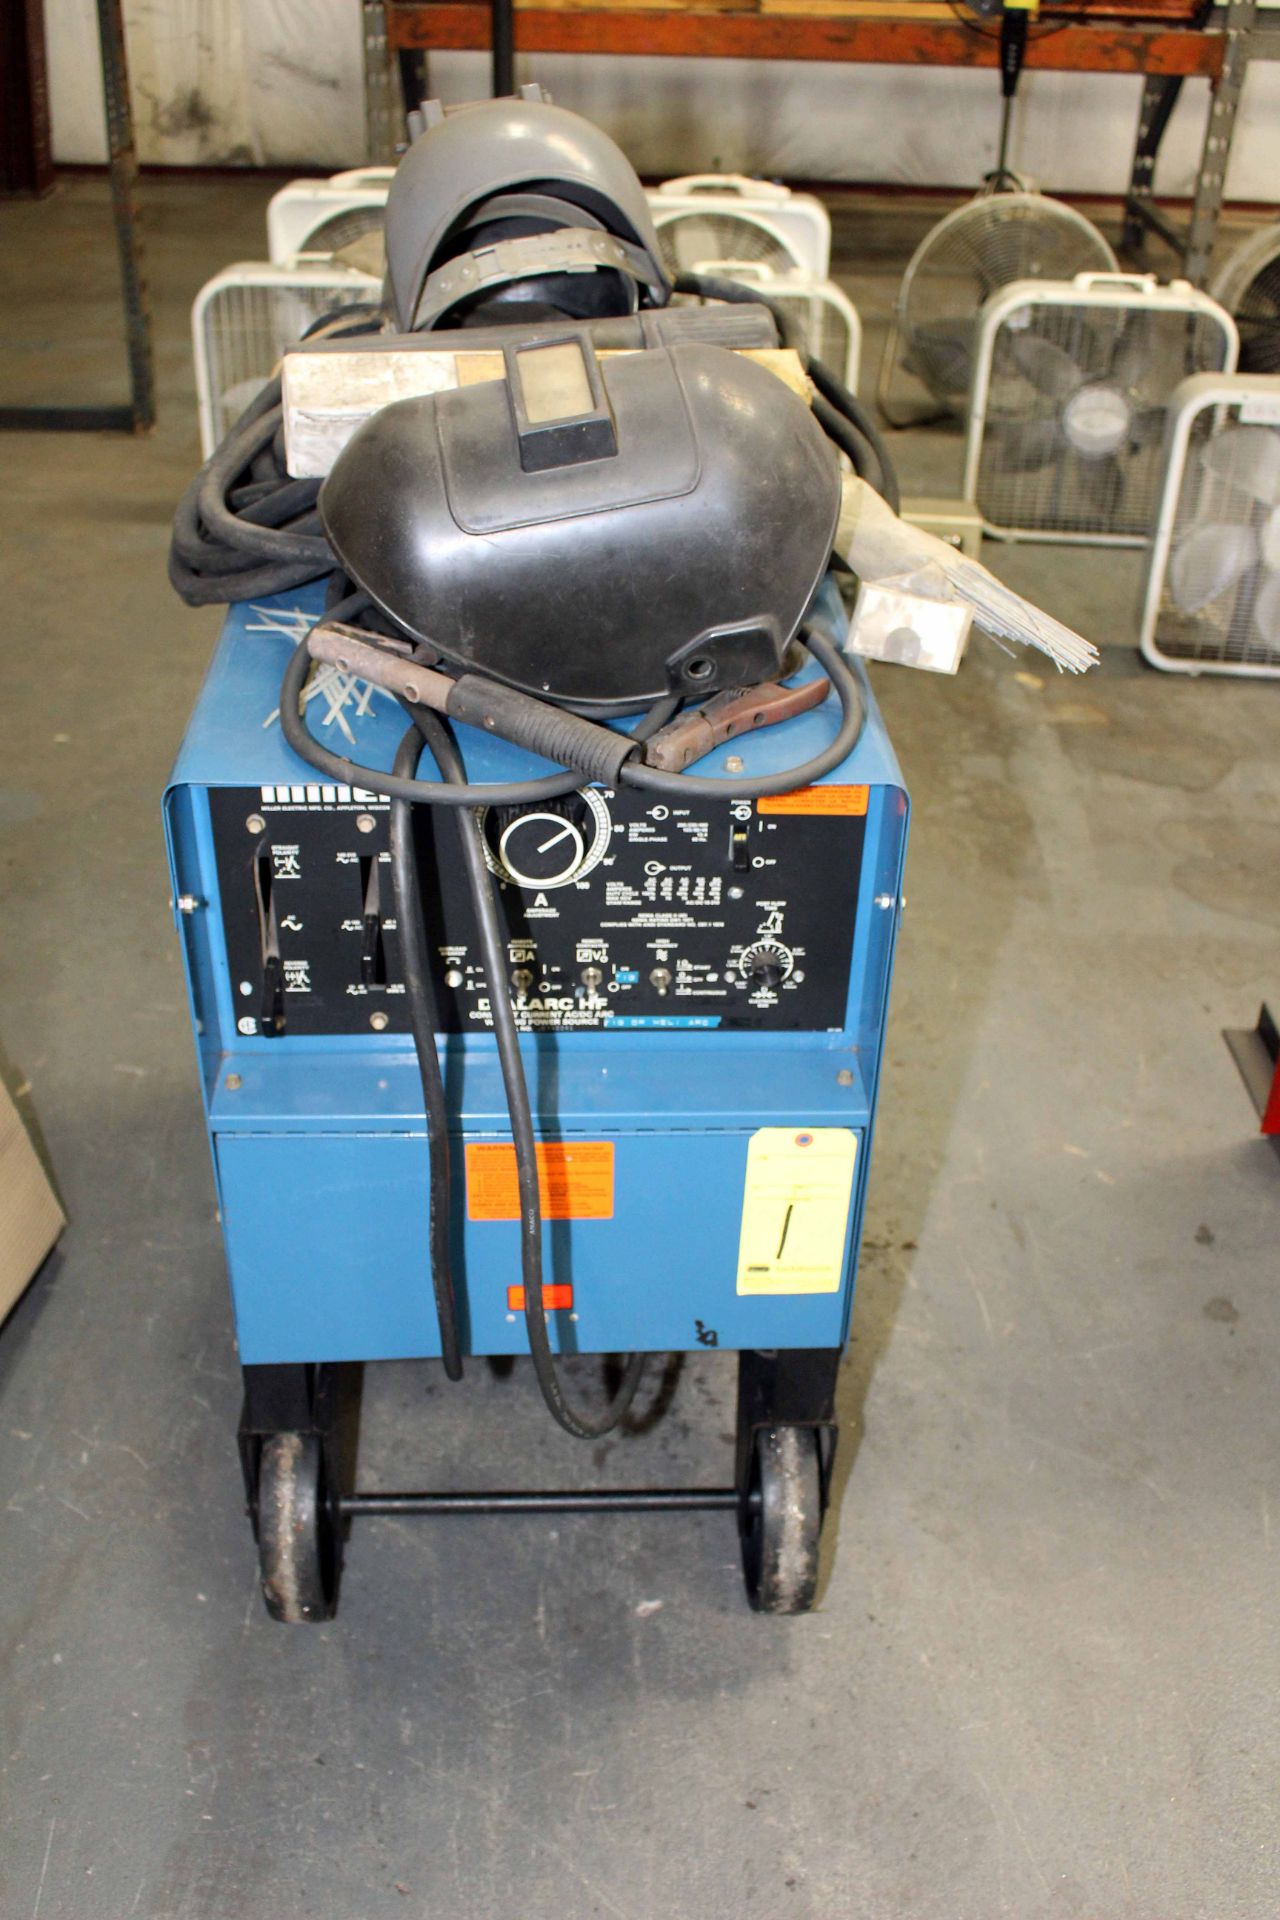 WELDING MACHINE, MILLER DIALARC MDL. HF, 250 amps @ 30 v., 40% duty cycle, welding leads &